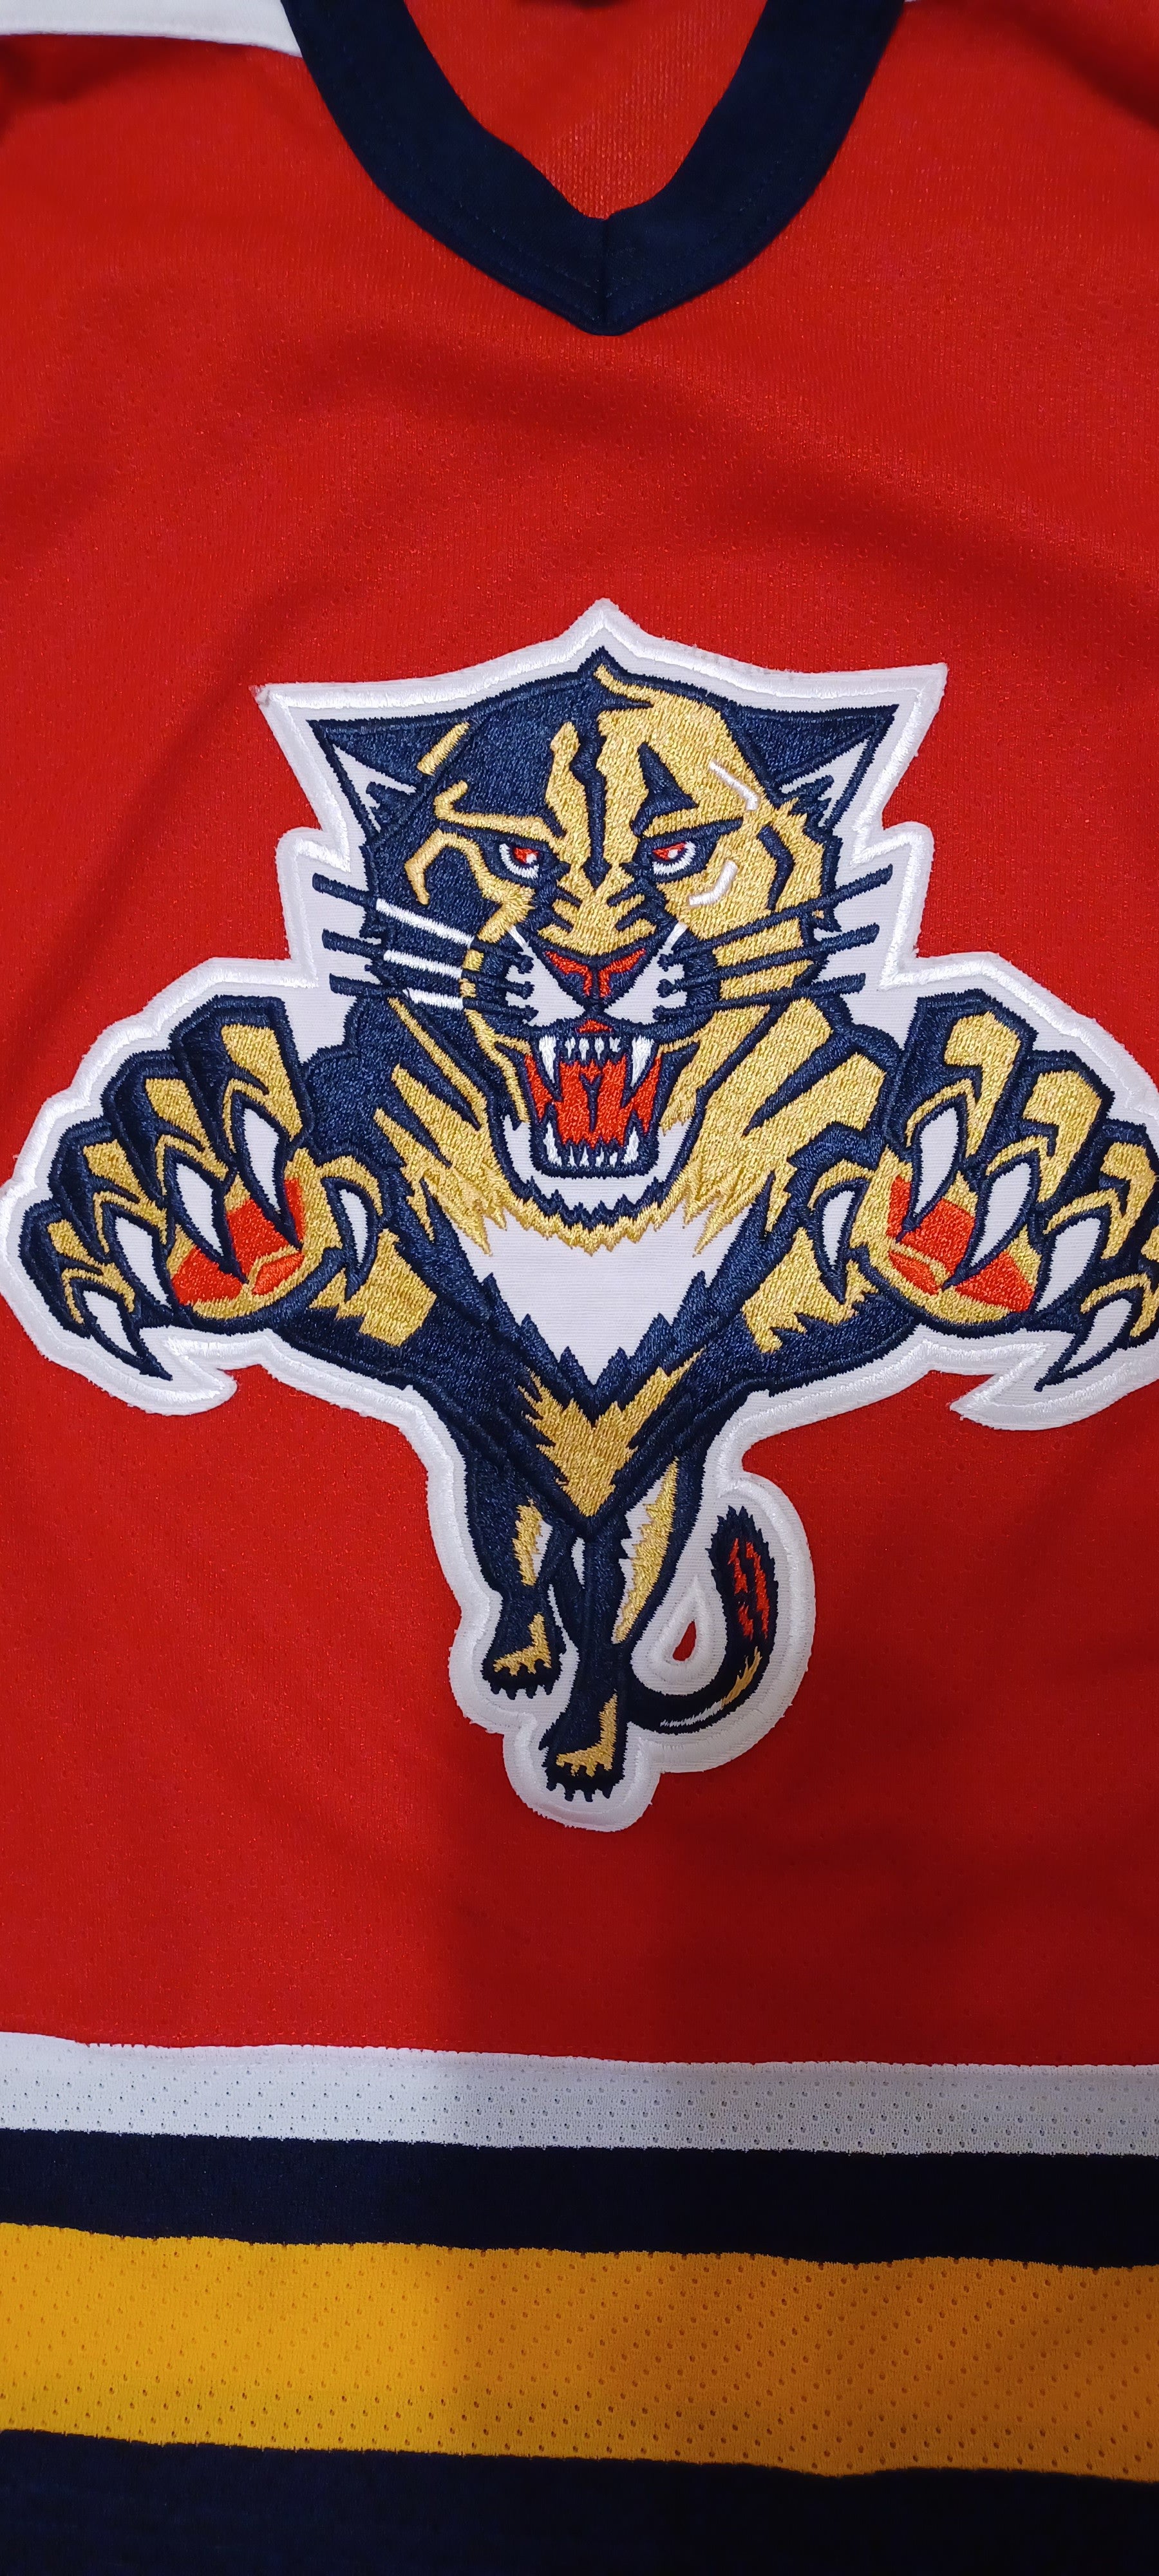 IN STORE NOW - CCM Florida Panthers Blank Jersey - Size Small = $65